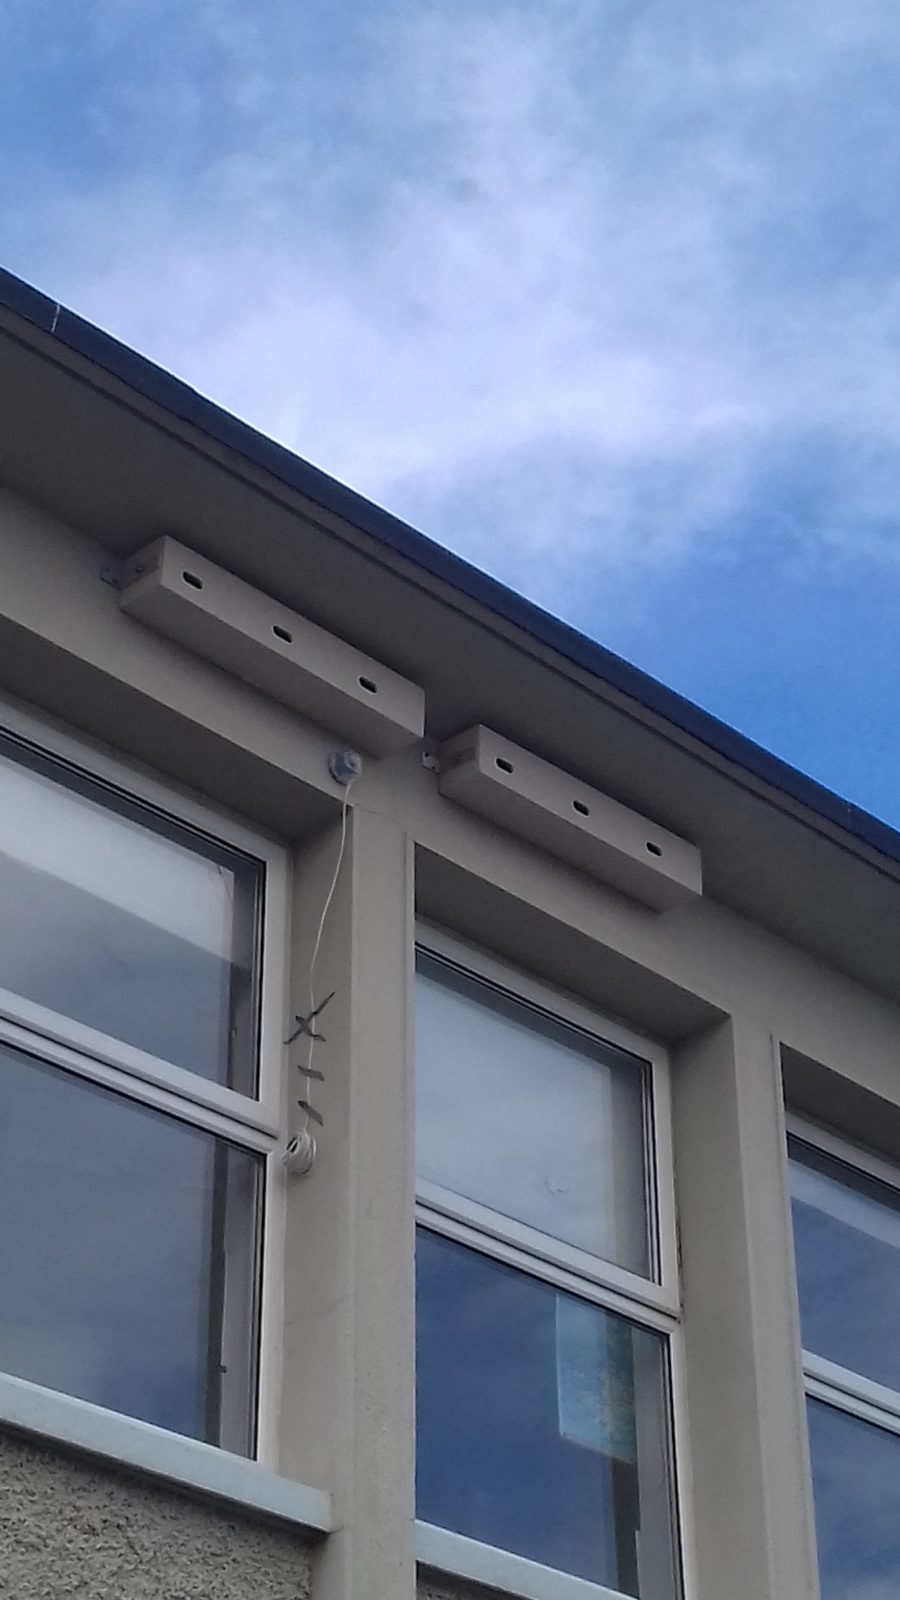 Installed nest boxes